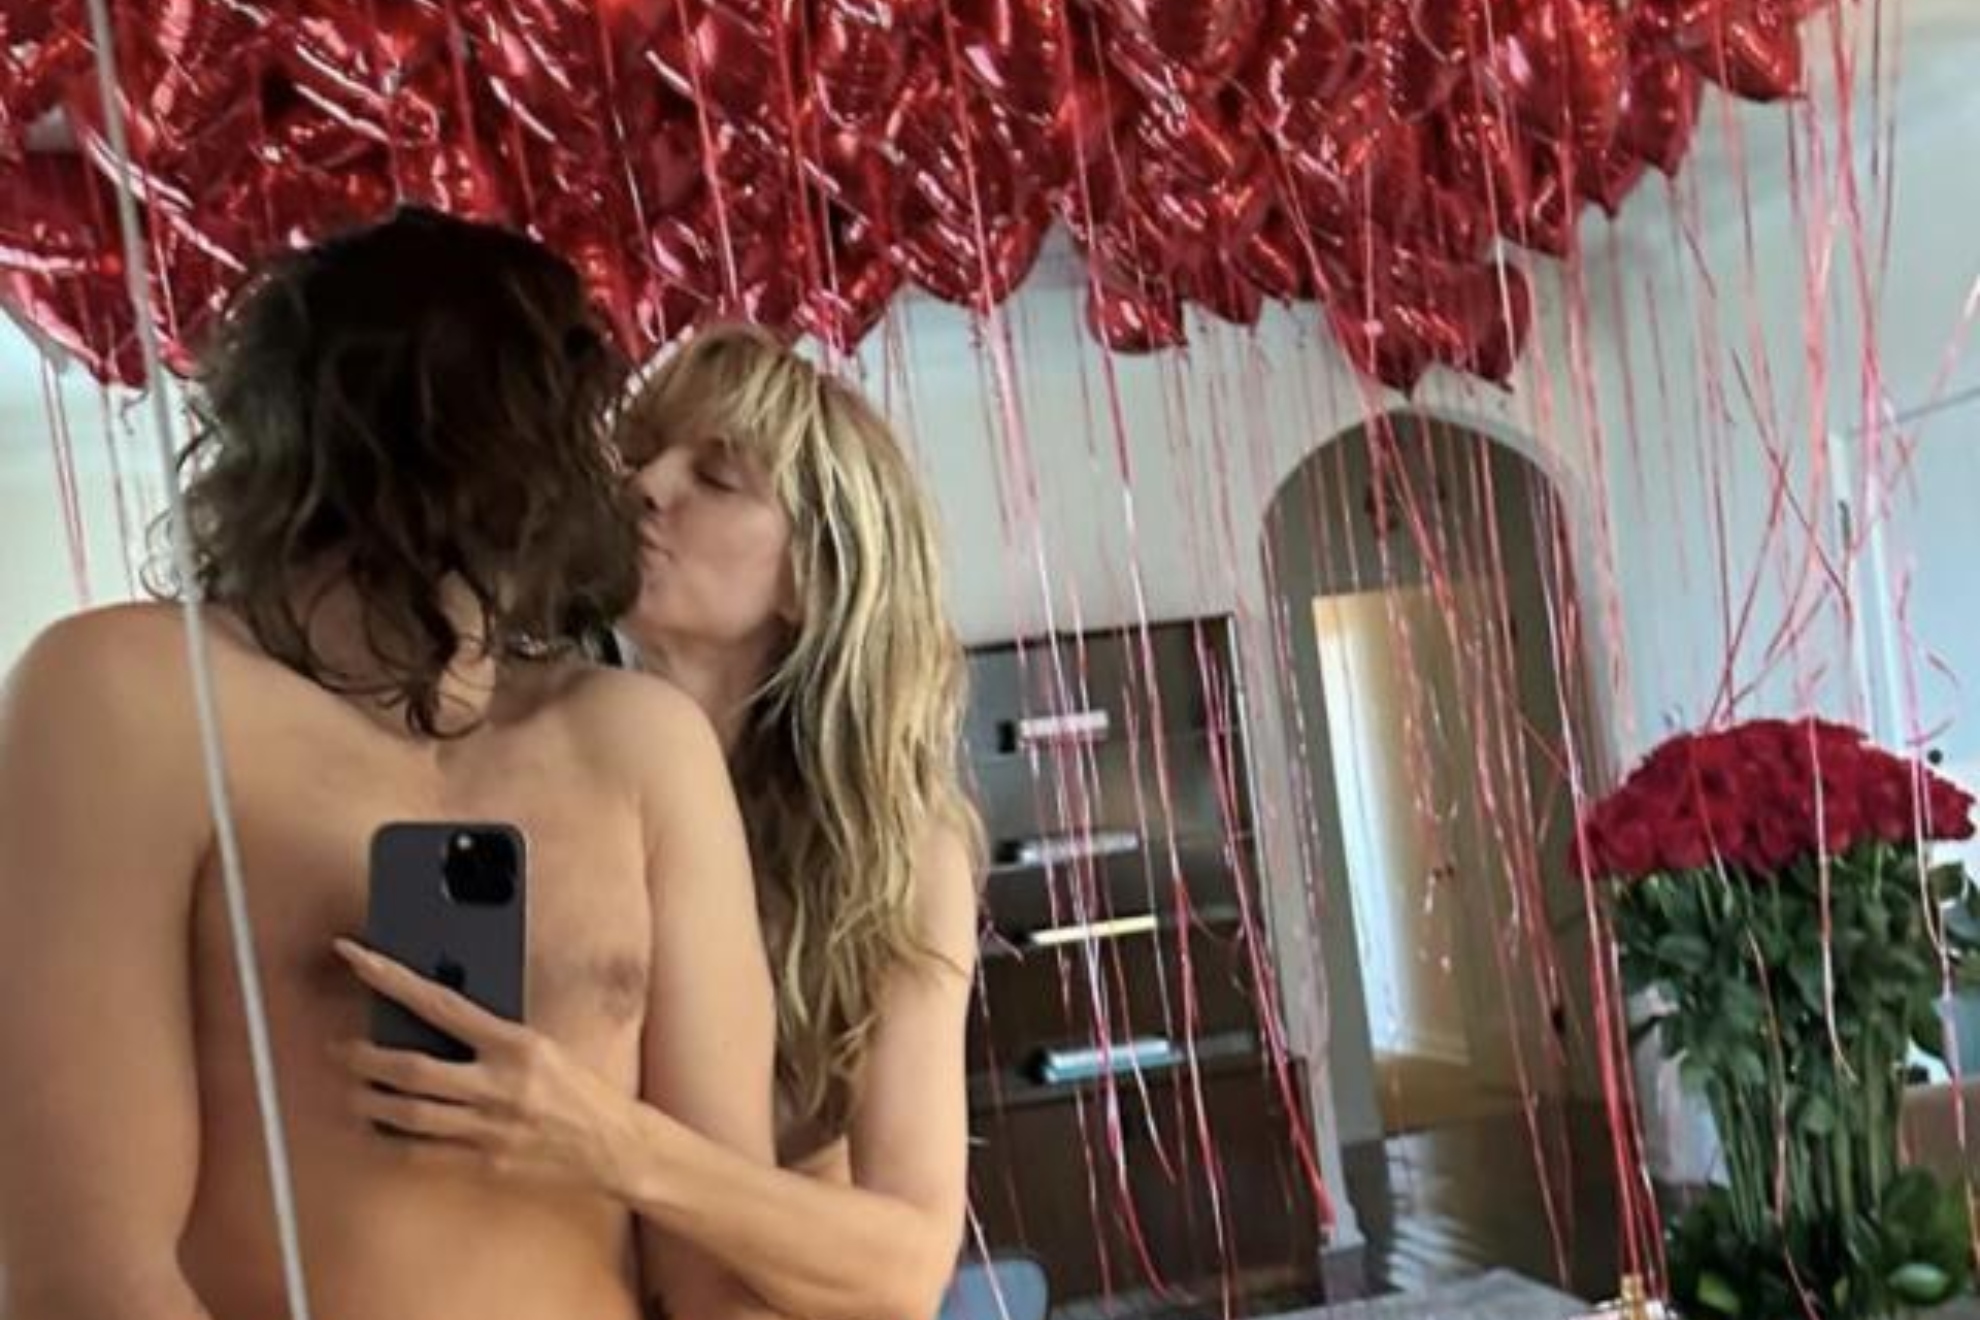 Heidi Klum has posted a photo and video on social media that show her husband, Tom Kaulitz, shirtless and enjoying sweet moments together.